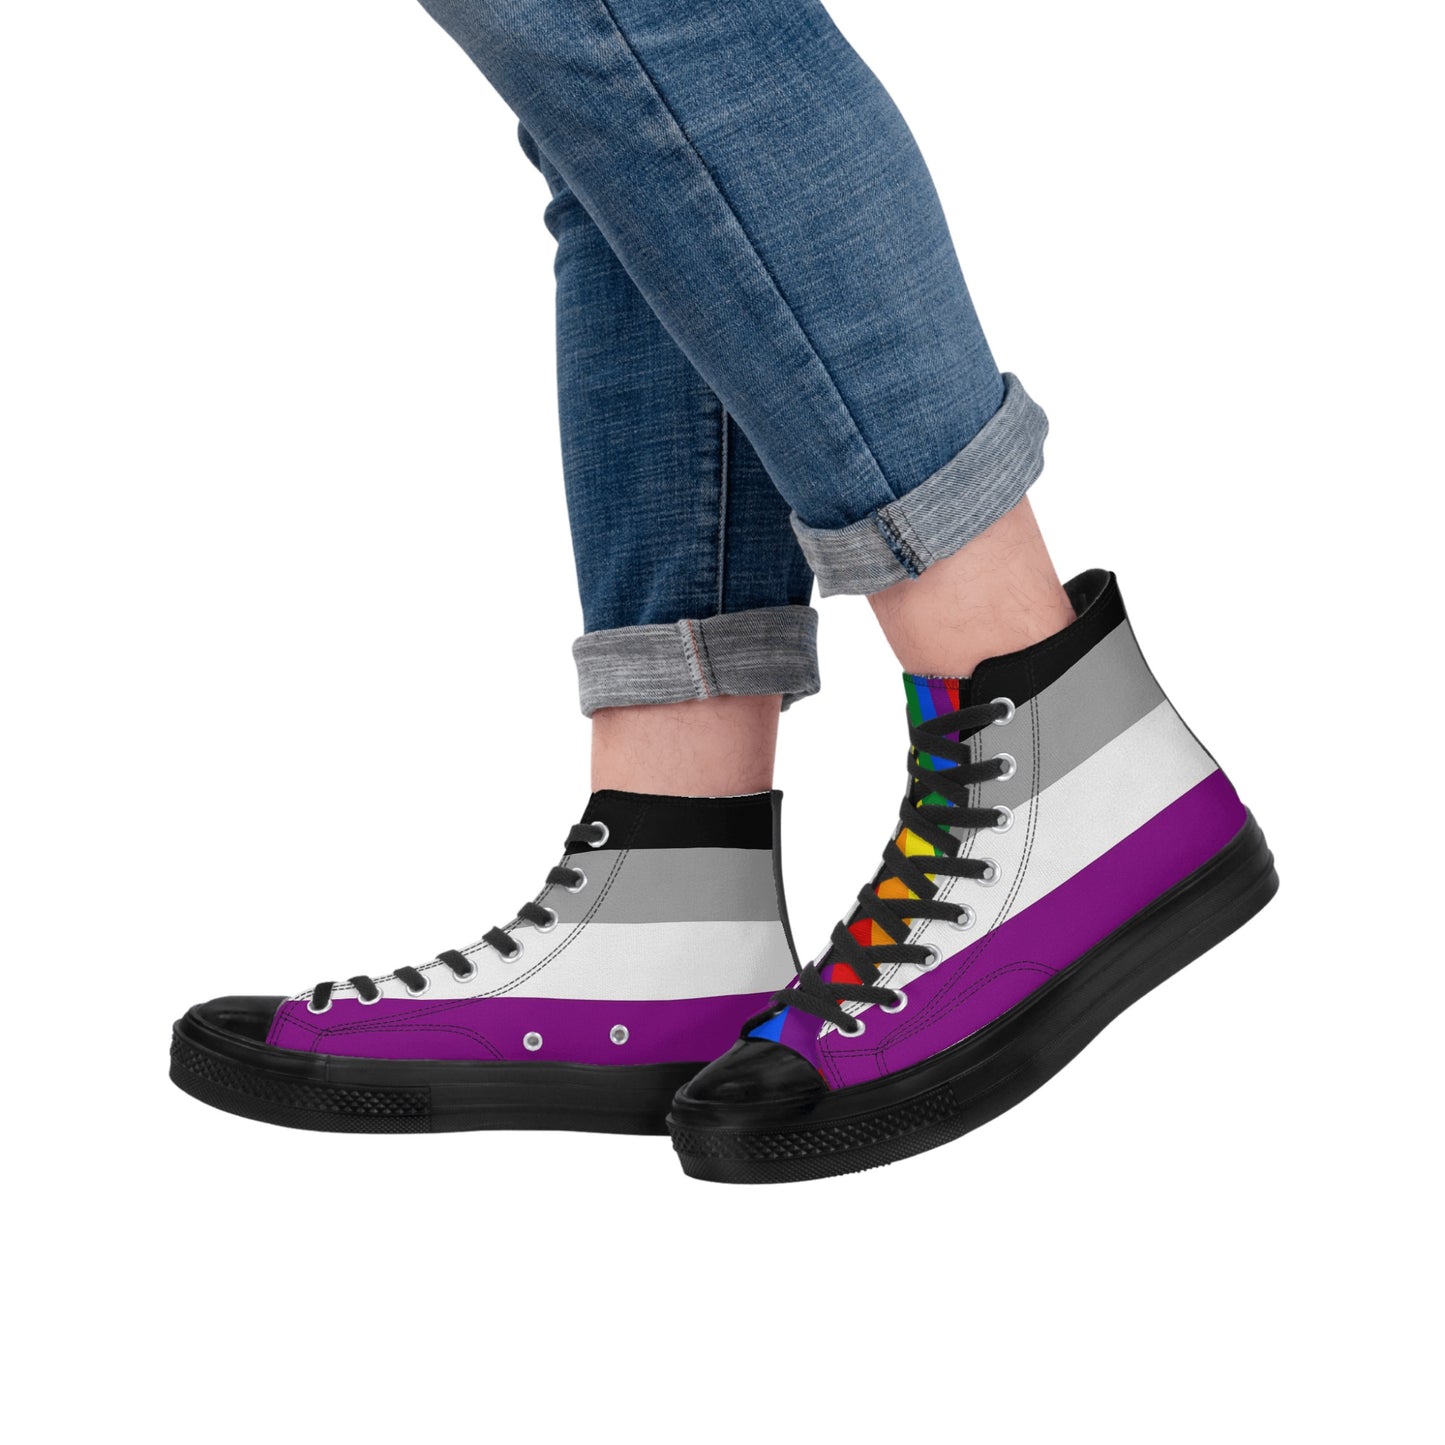 Asexual Pride Collection - Mens Classic Black High Top Canvas Shoes for the LGBTQIA+ community